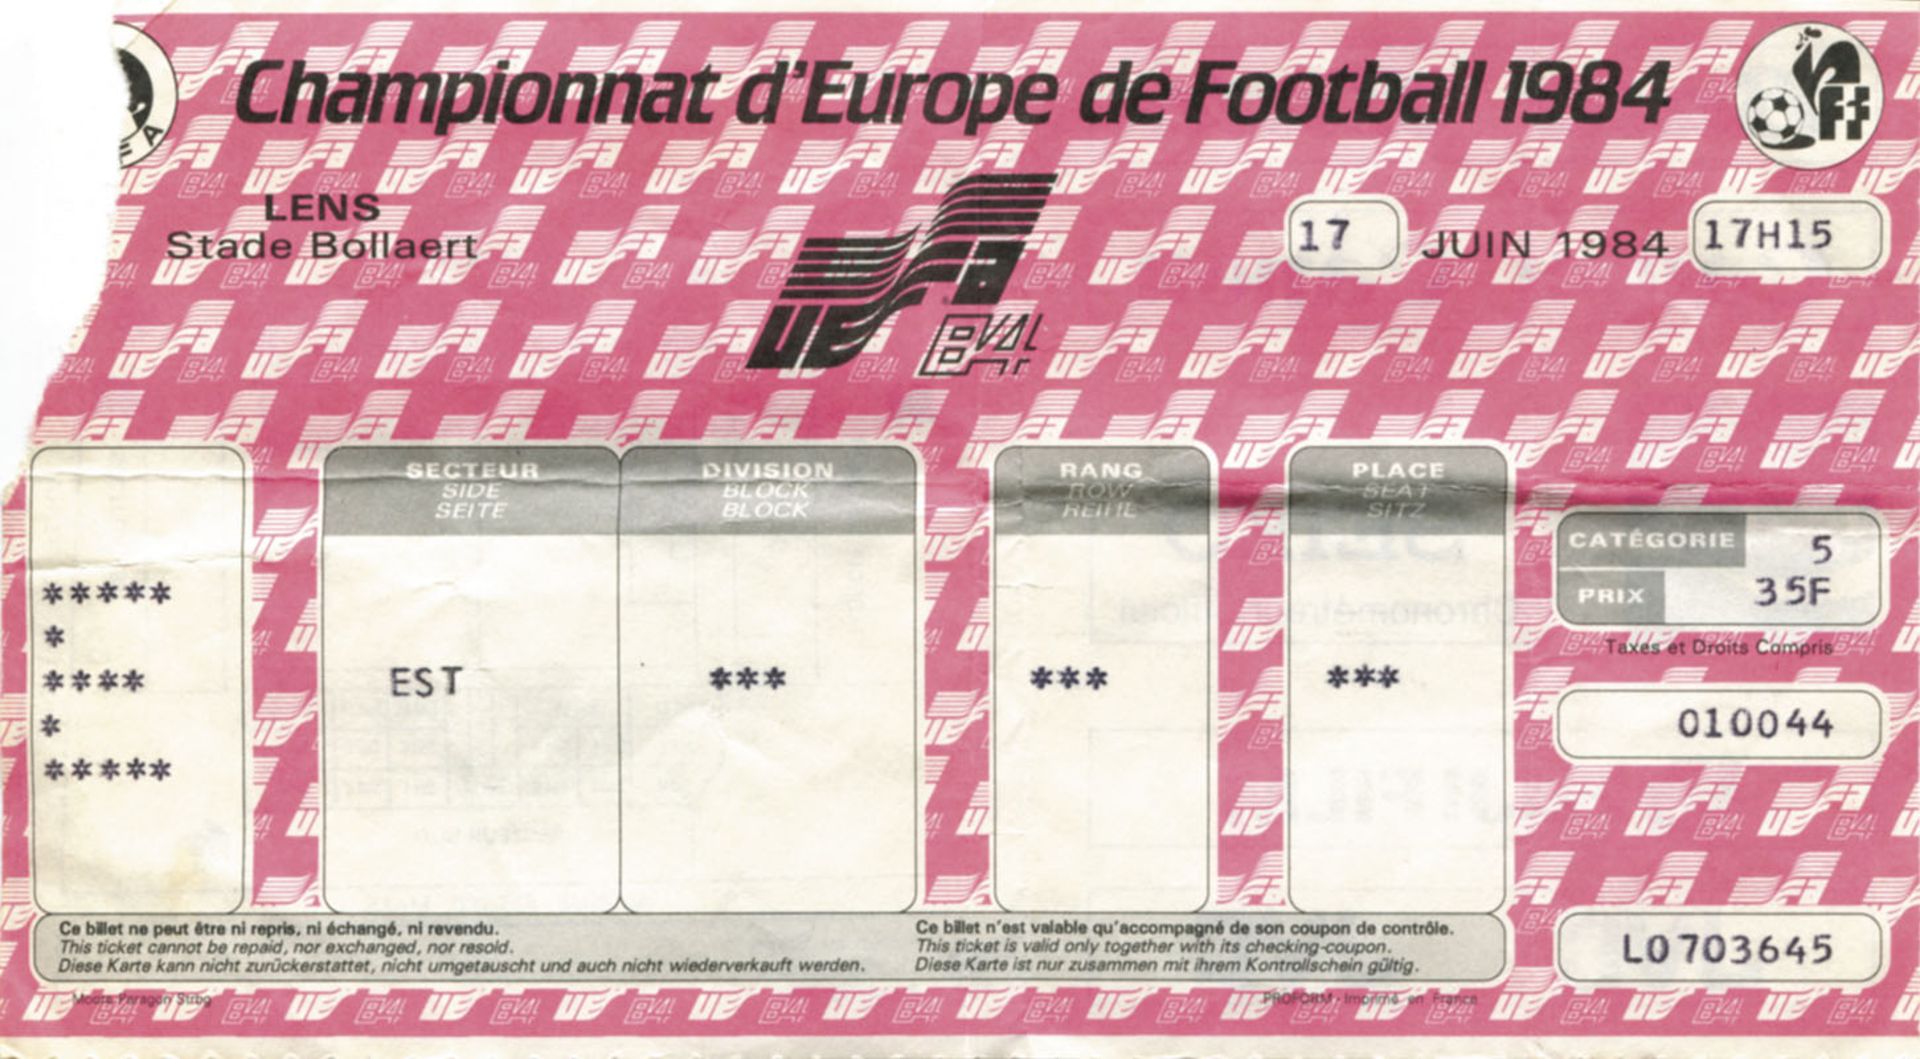 Ticket: UEFA Euro 1984 Germany vs Romania - on June 17th, 1984 in Lens. Size18x10 cm. -- folded, cre